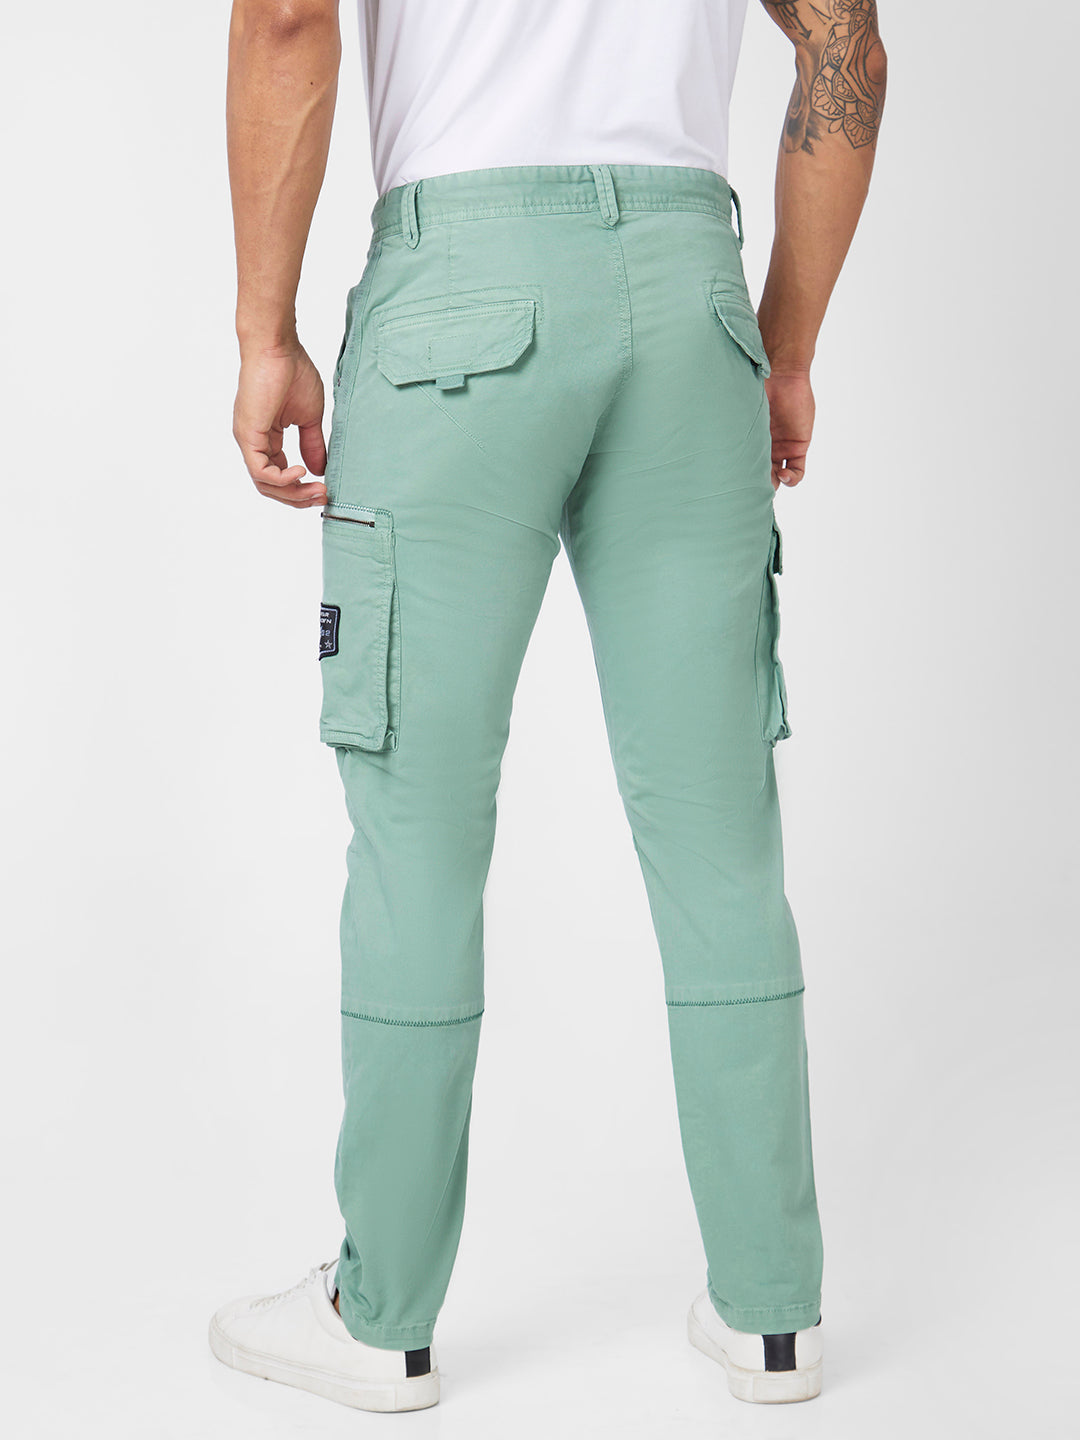 Relaxed Fit Nylon Cargo Pants - Light sage green - Men | H&M US